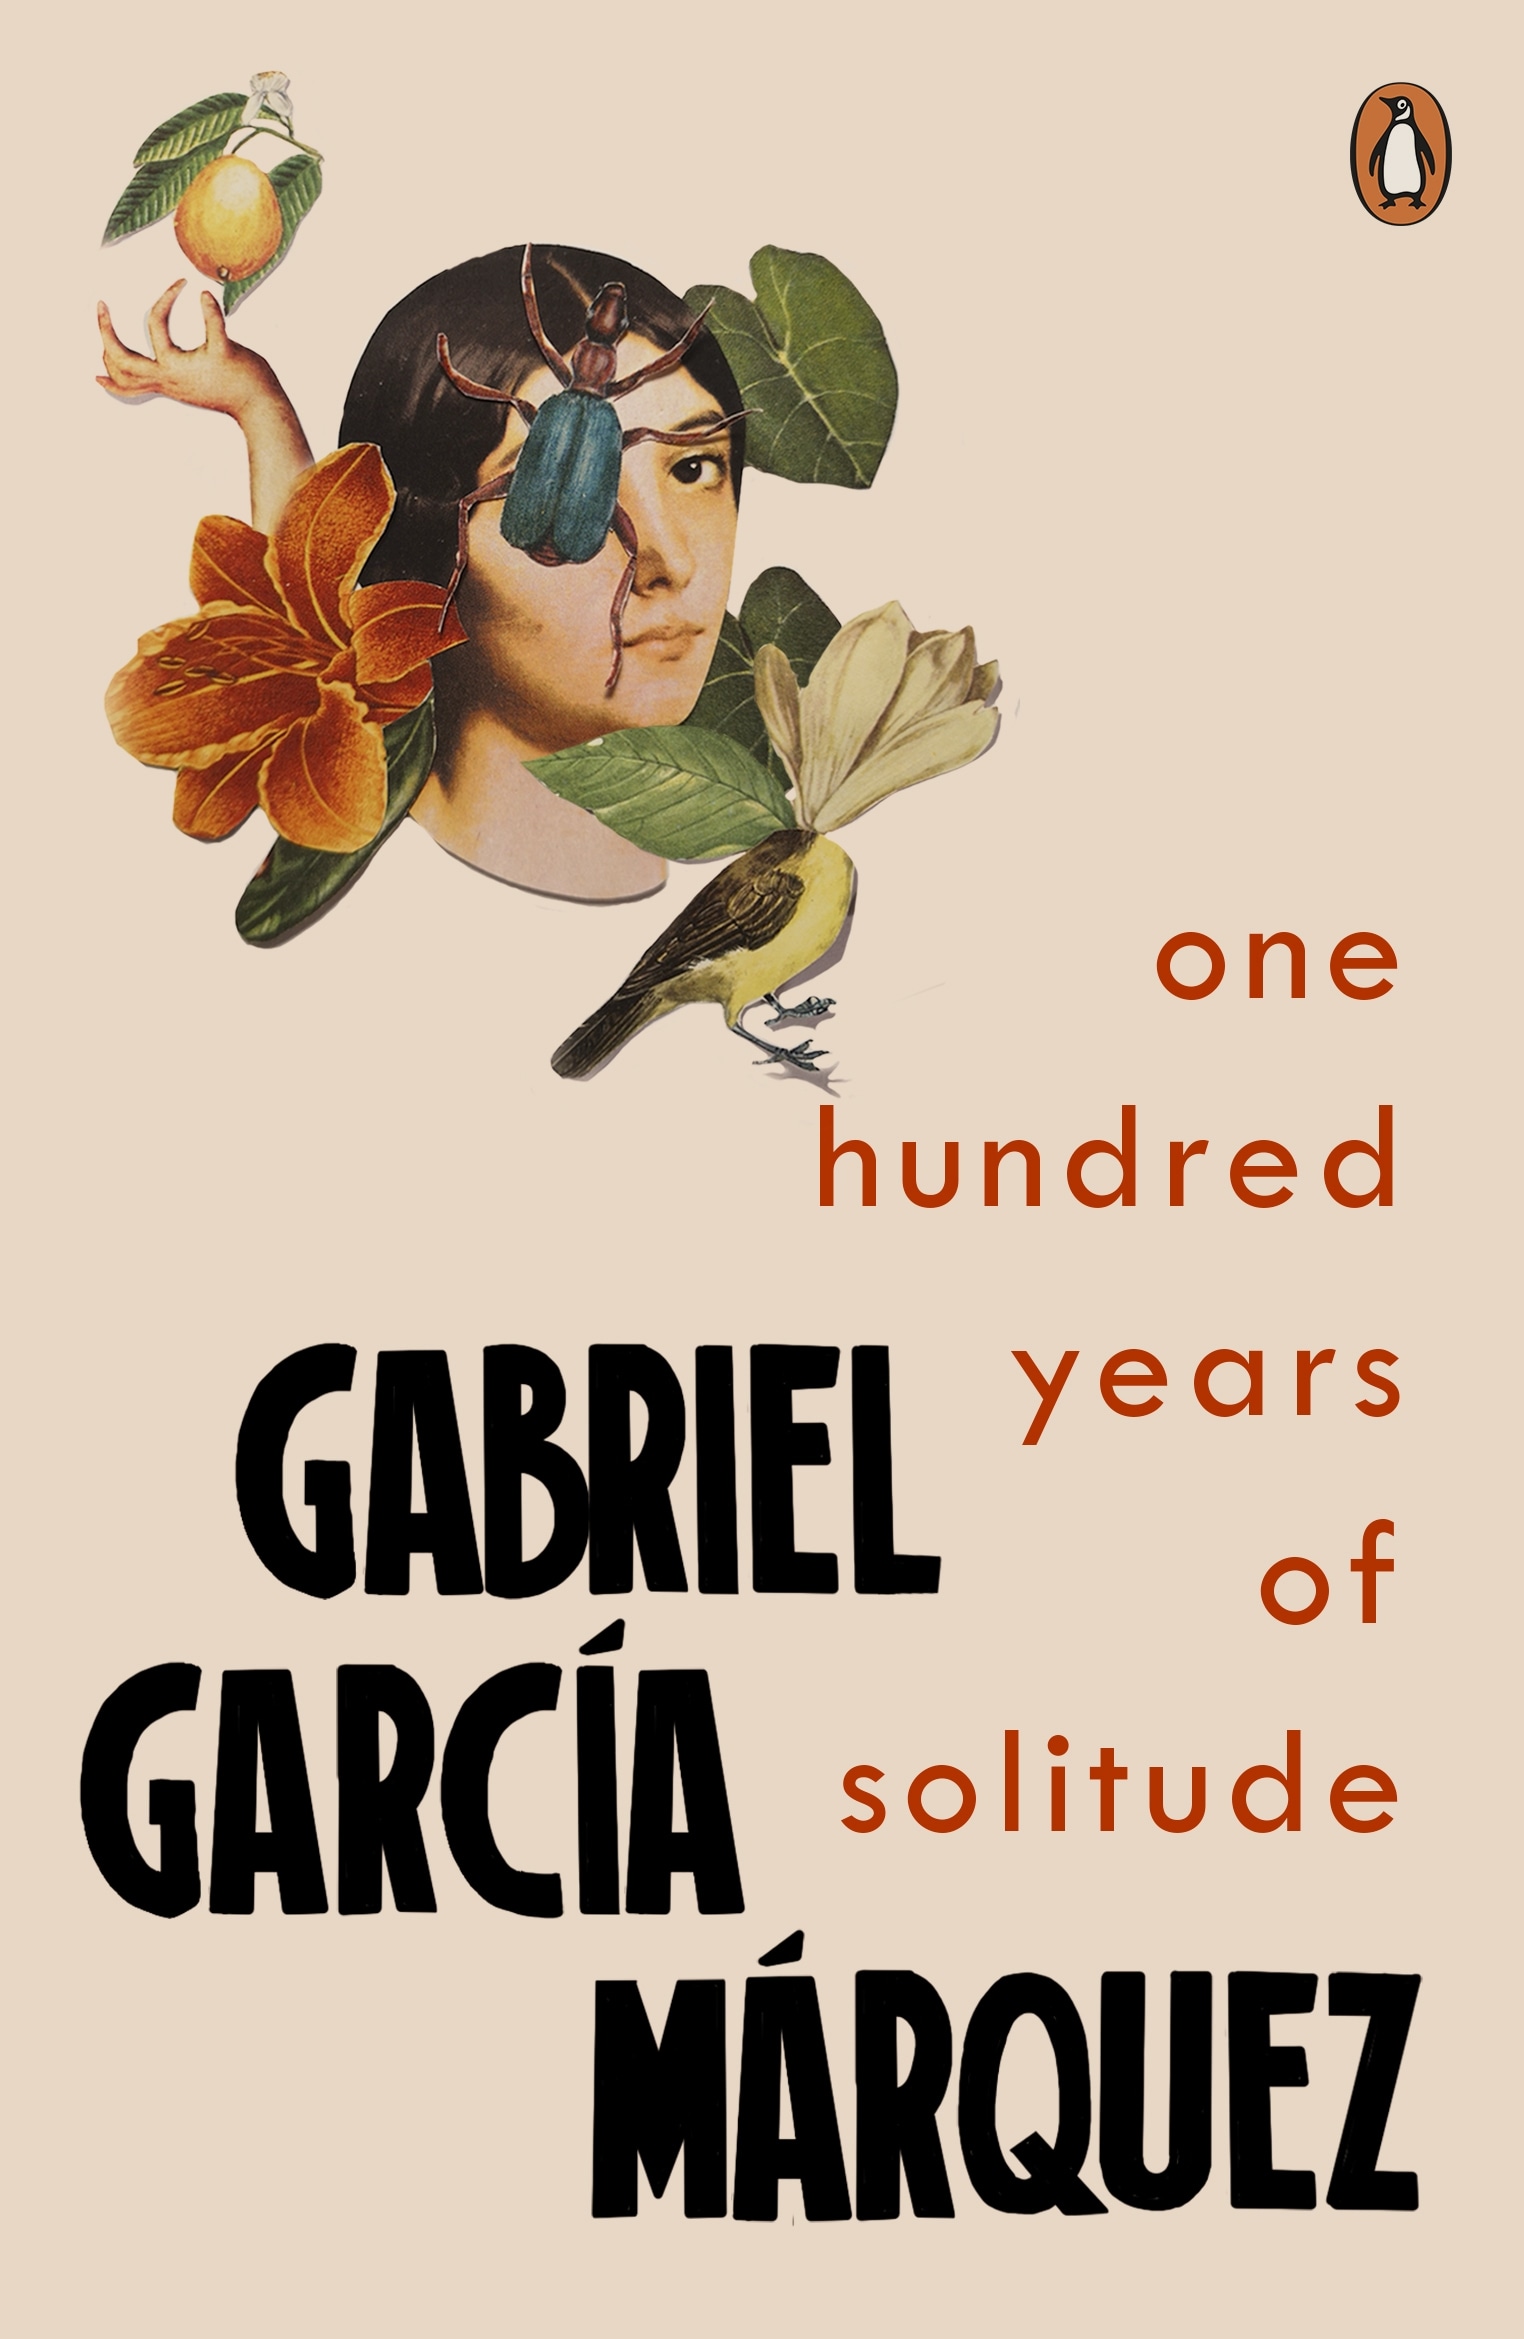 Book “One Hundred Years of Solitude” by Gabriel Garcia Marquez — March 6, 2014